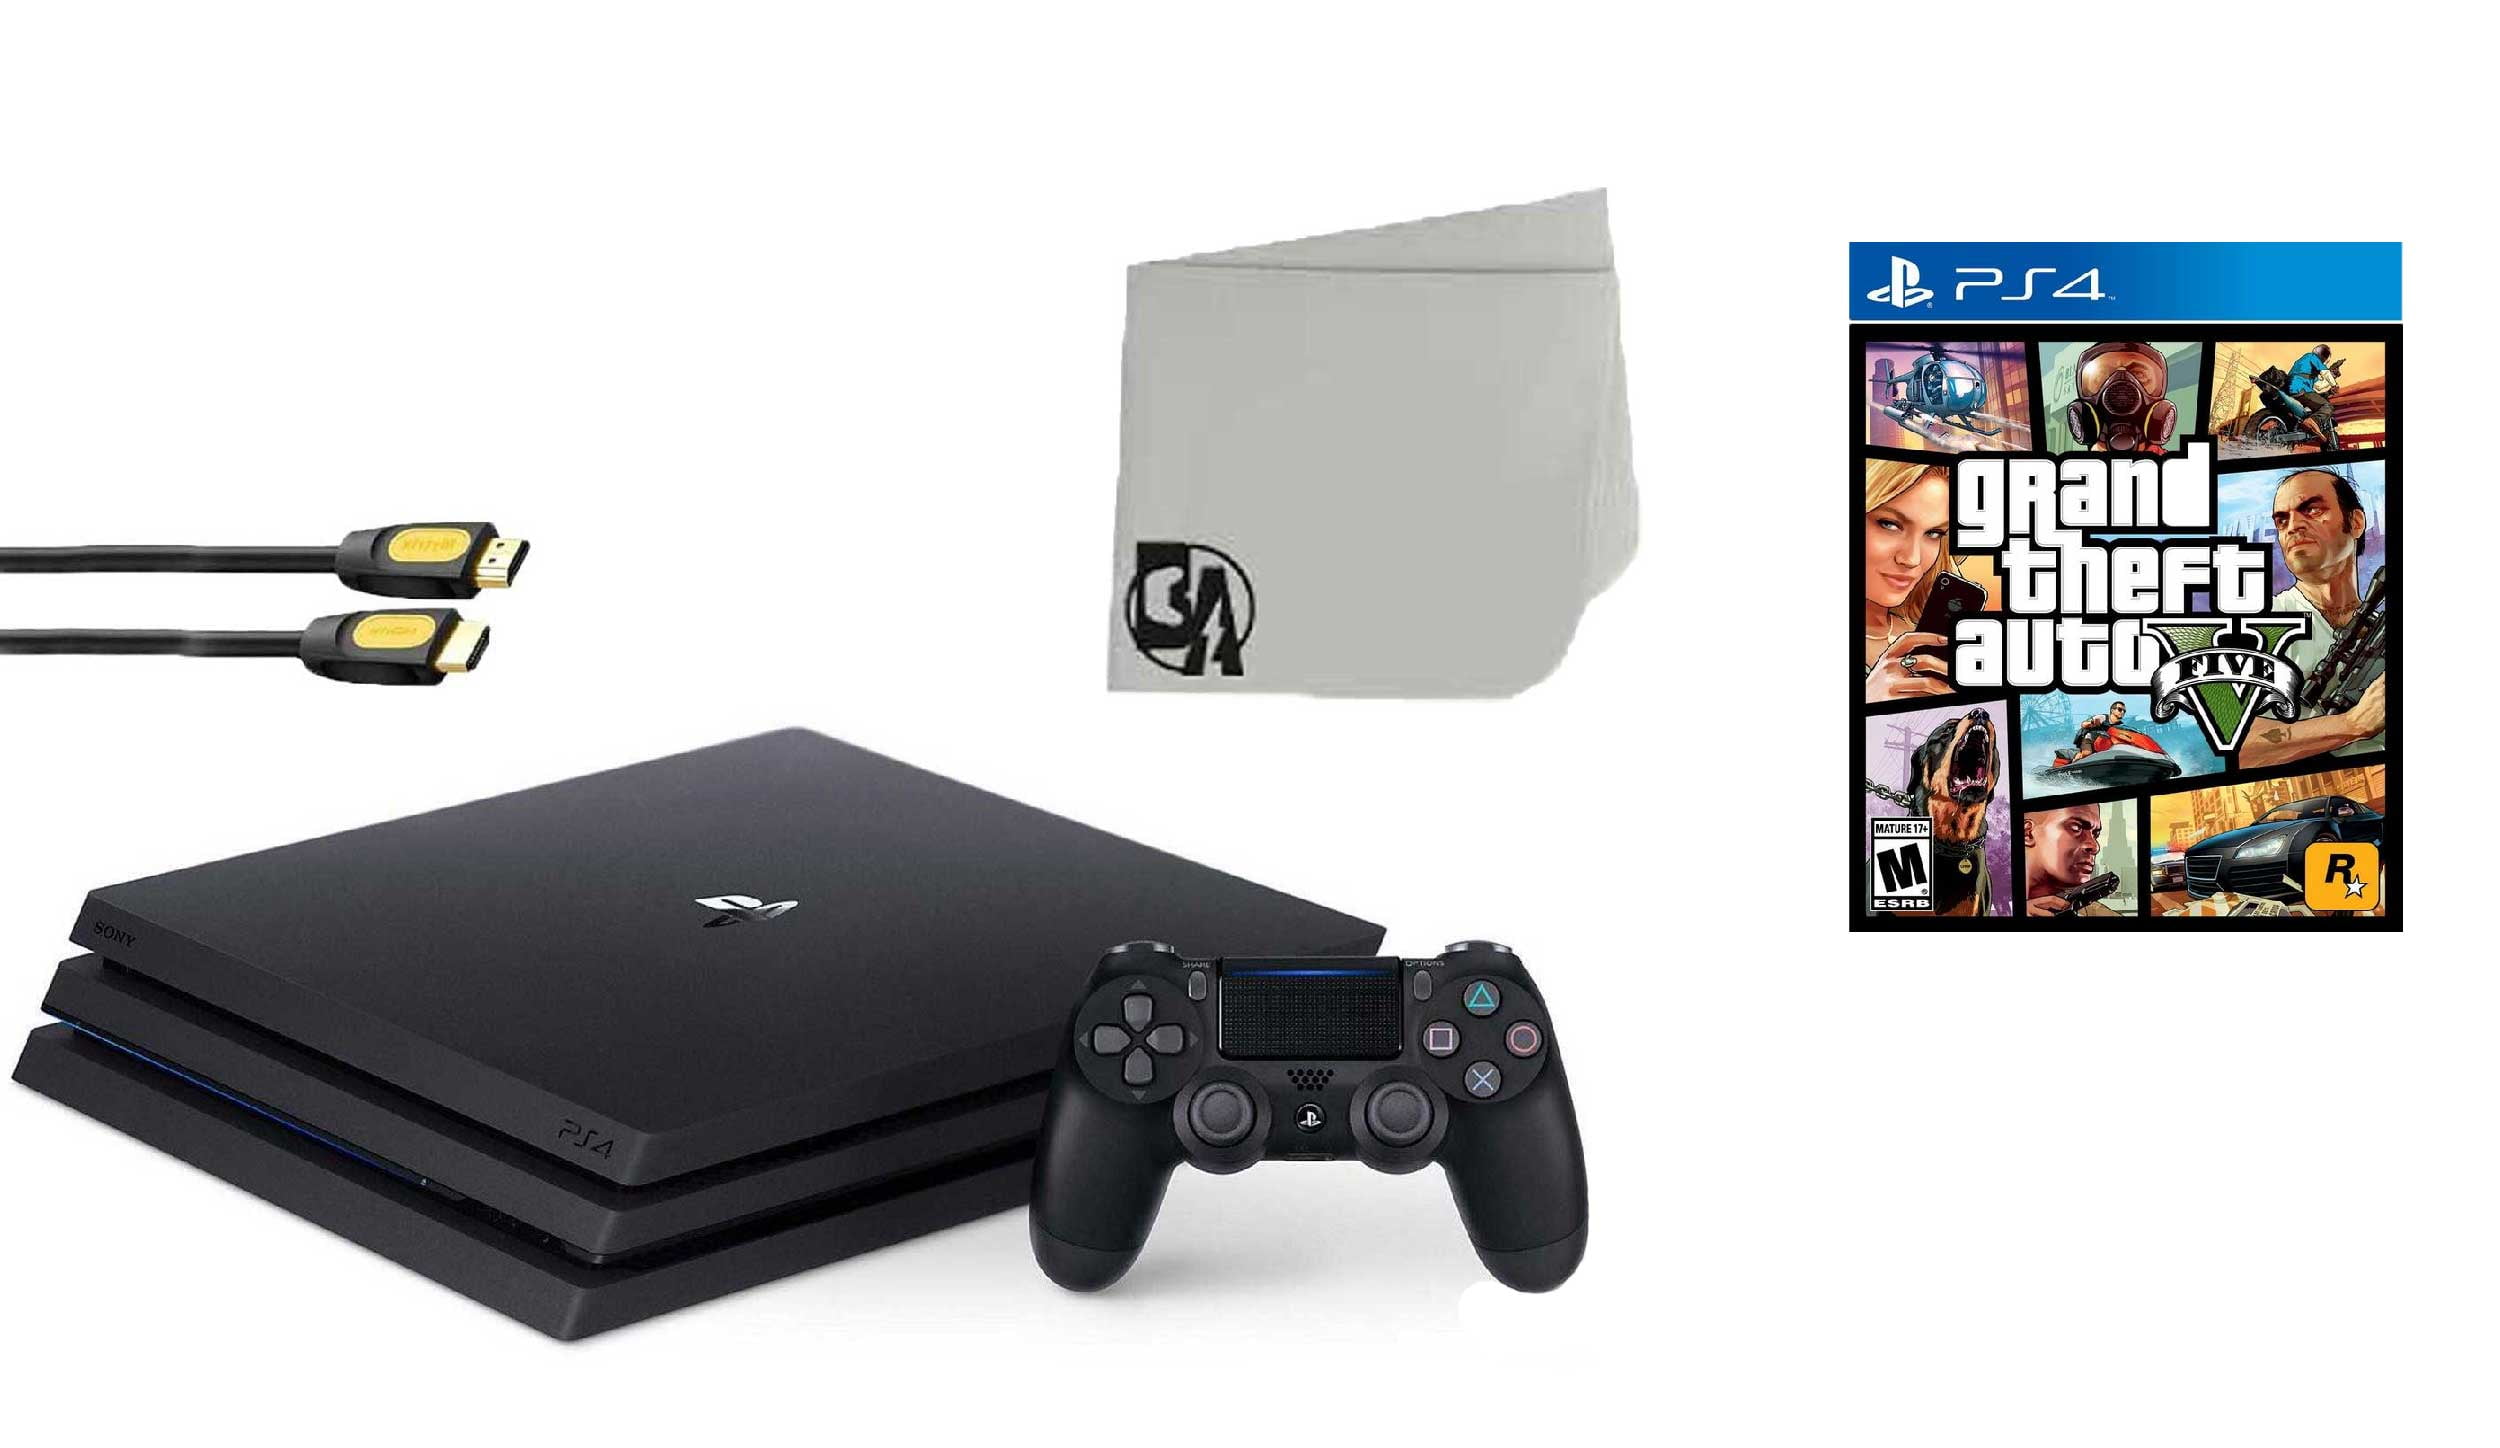 at tilføje Akkumulering Centimeter Sony PlayStation 4 Pro 1TB Gaming Console Black with Grand Theft Auto V  BOLT AXTION Bundle Like New - Walmart.com